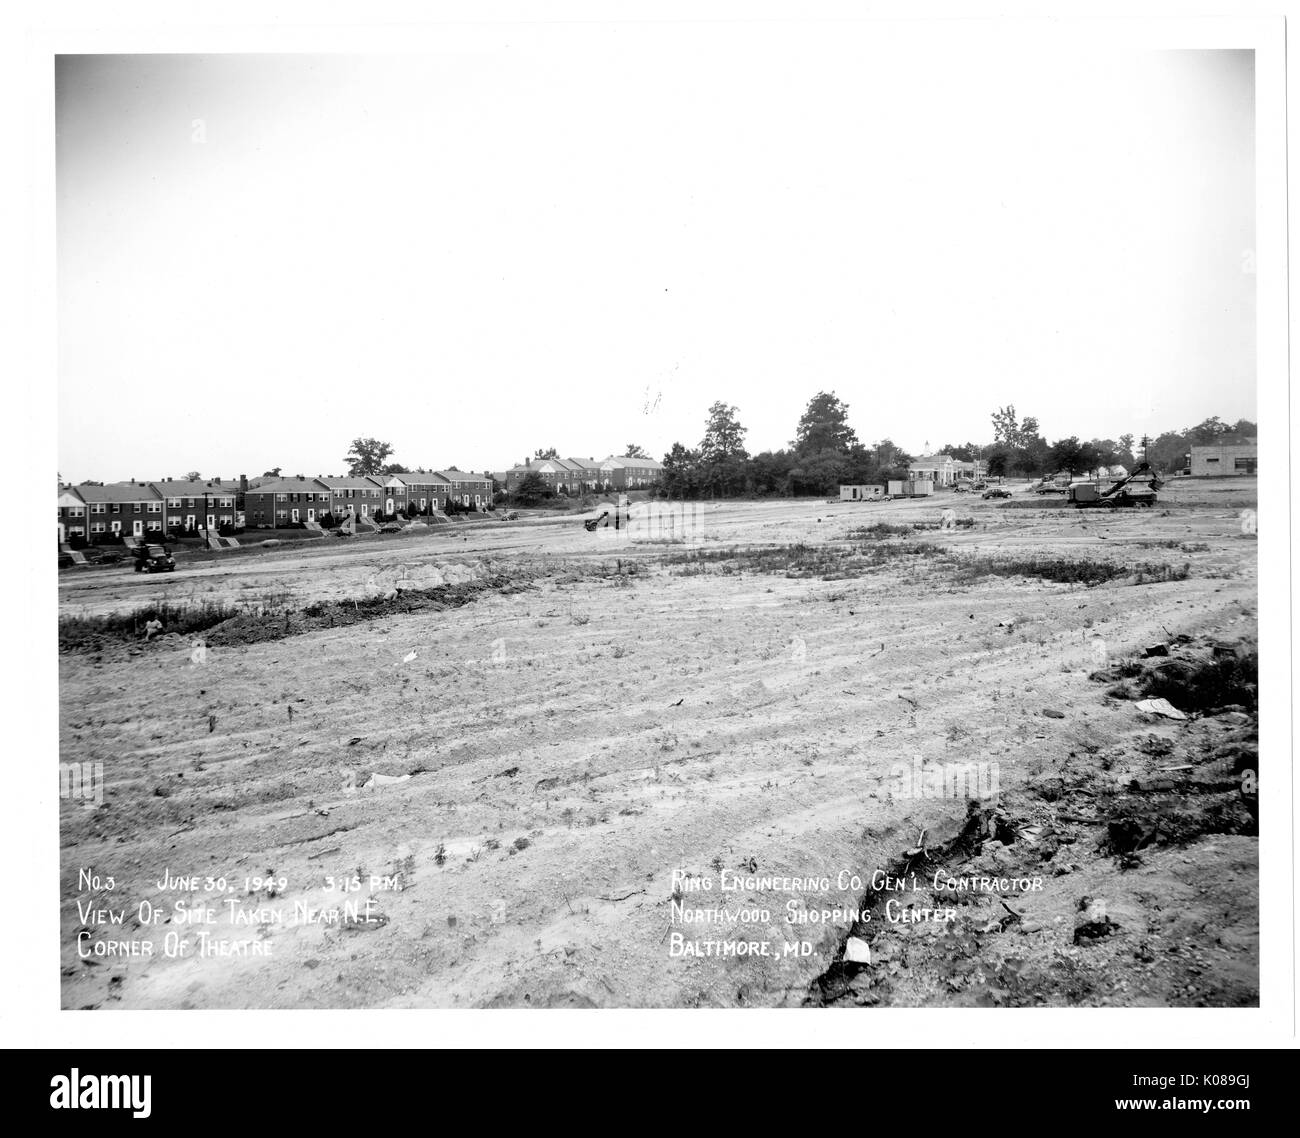 Photograph of undeveloped site for the Northwood Shopping Center in Baltimore, Maryland, with residential buildings and trees in the background, Baltimore, Maryland, June 30, 1949. Stock Photo